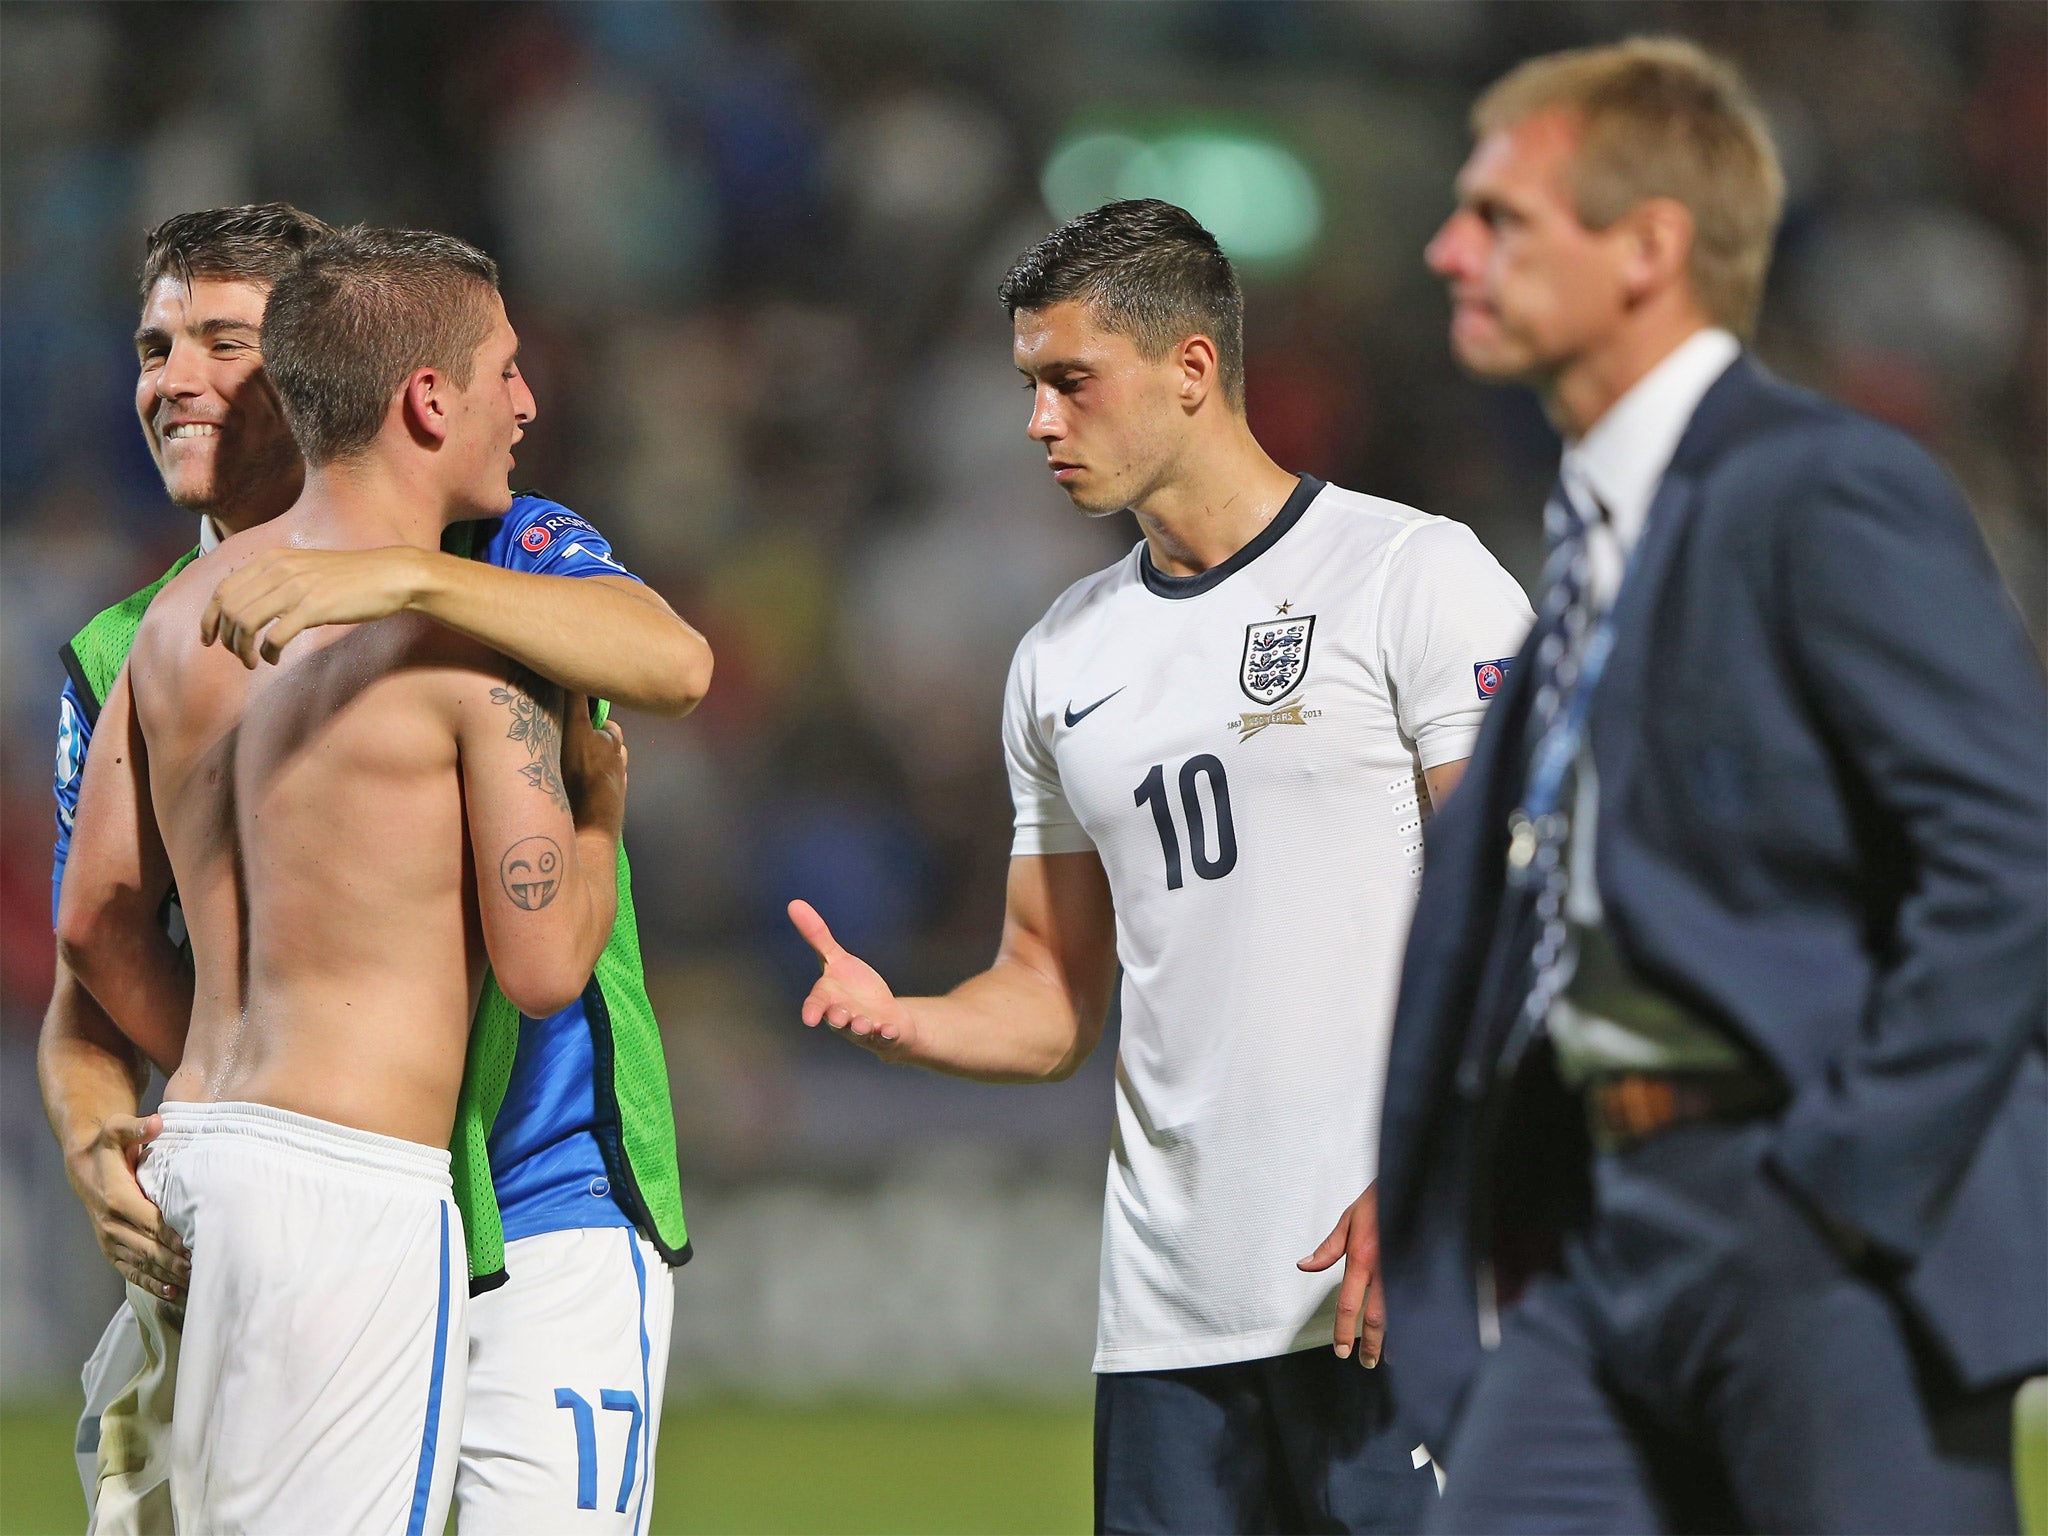 England captain Jason Lowe offers his hand to Italy's Alberto Paloschi after the game